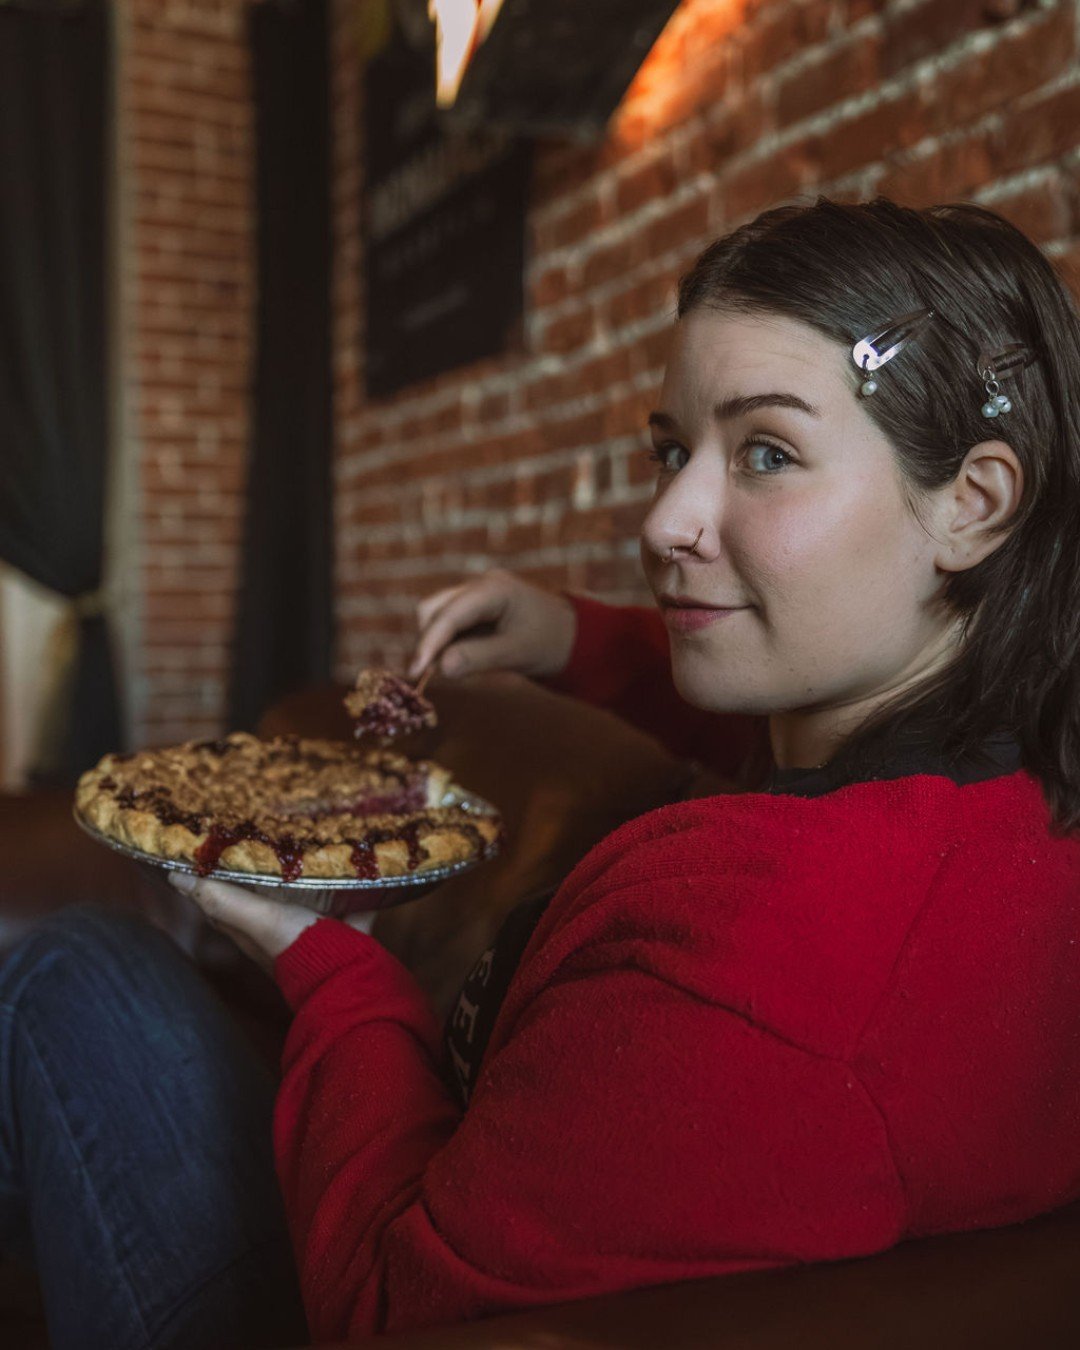 Our pies are so yummy, we understand if you don't want to share.

Our current menu includes:
🥧 Dutch Apple
🥧 Tart Cherry
🥧 Salted Maple
🥧 Pineapple Macadamia Nut
🥧 German Chocolate
🥧 Bourbon Pecan
🥧 Four Berry

Which are you ordering?